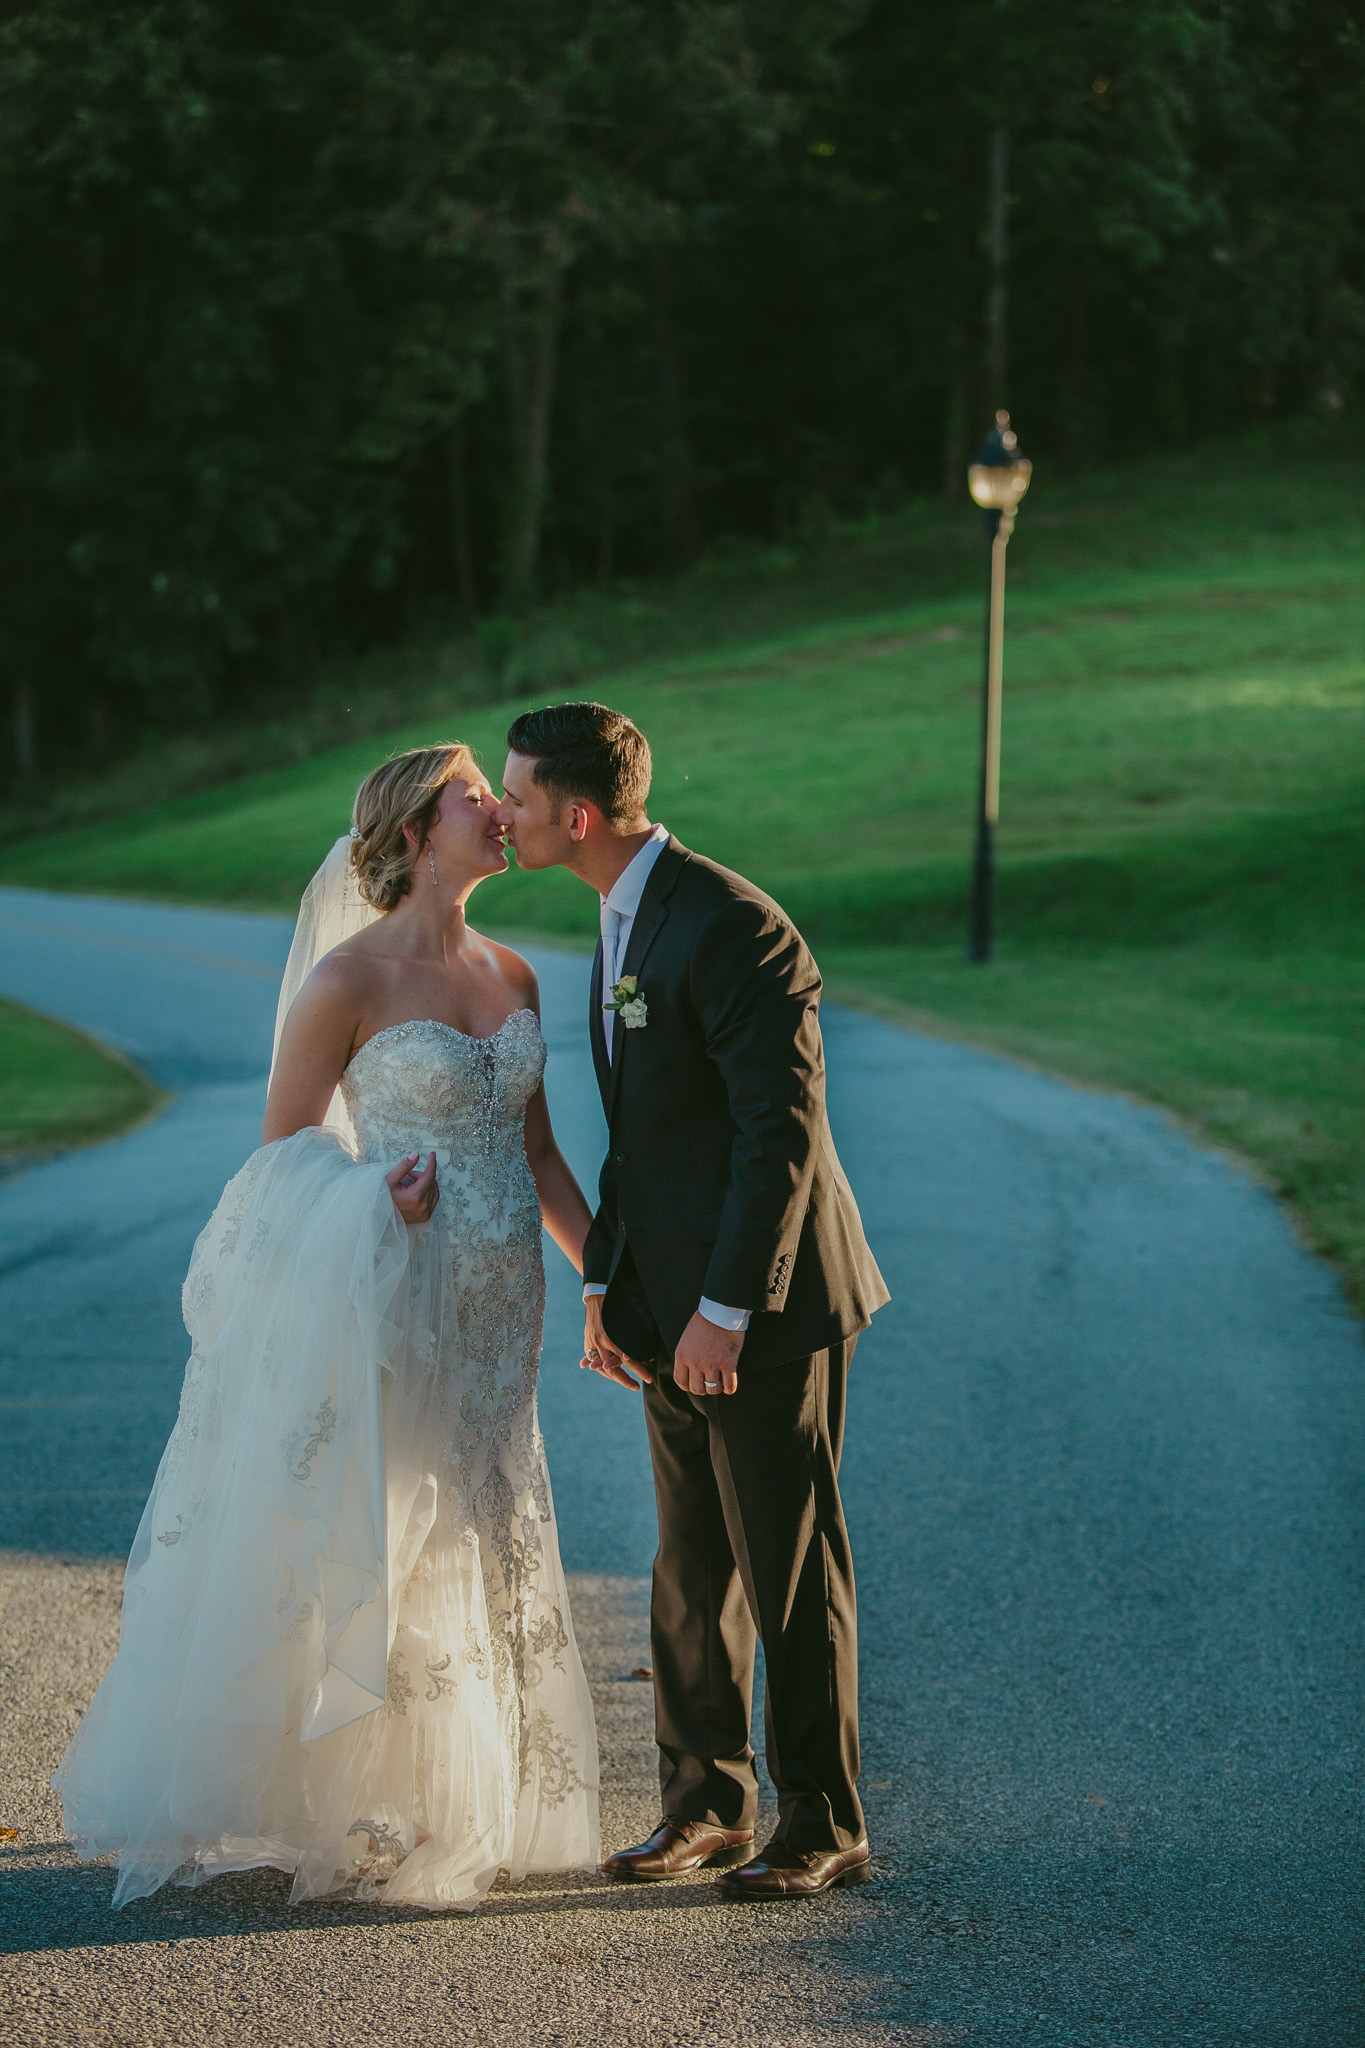 A sweet kiss as bride and groom celebrate their wedding at Crest Center and Pavilion